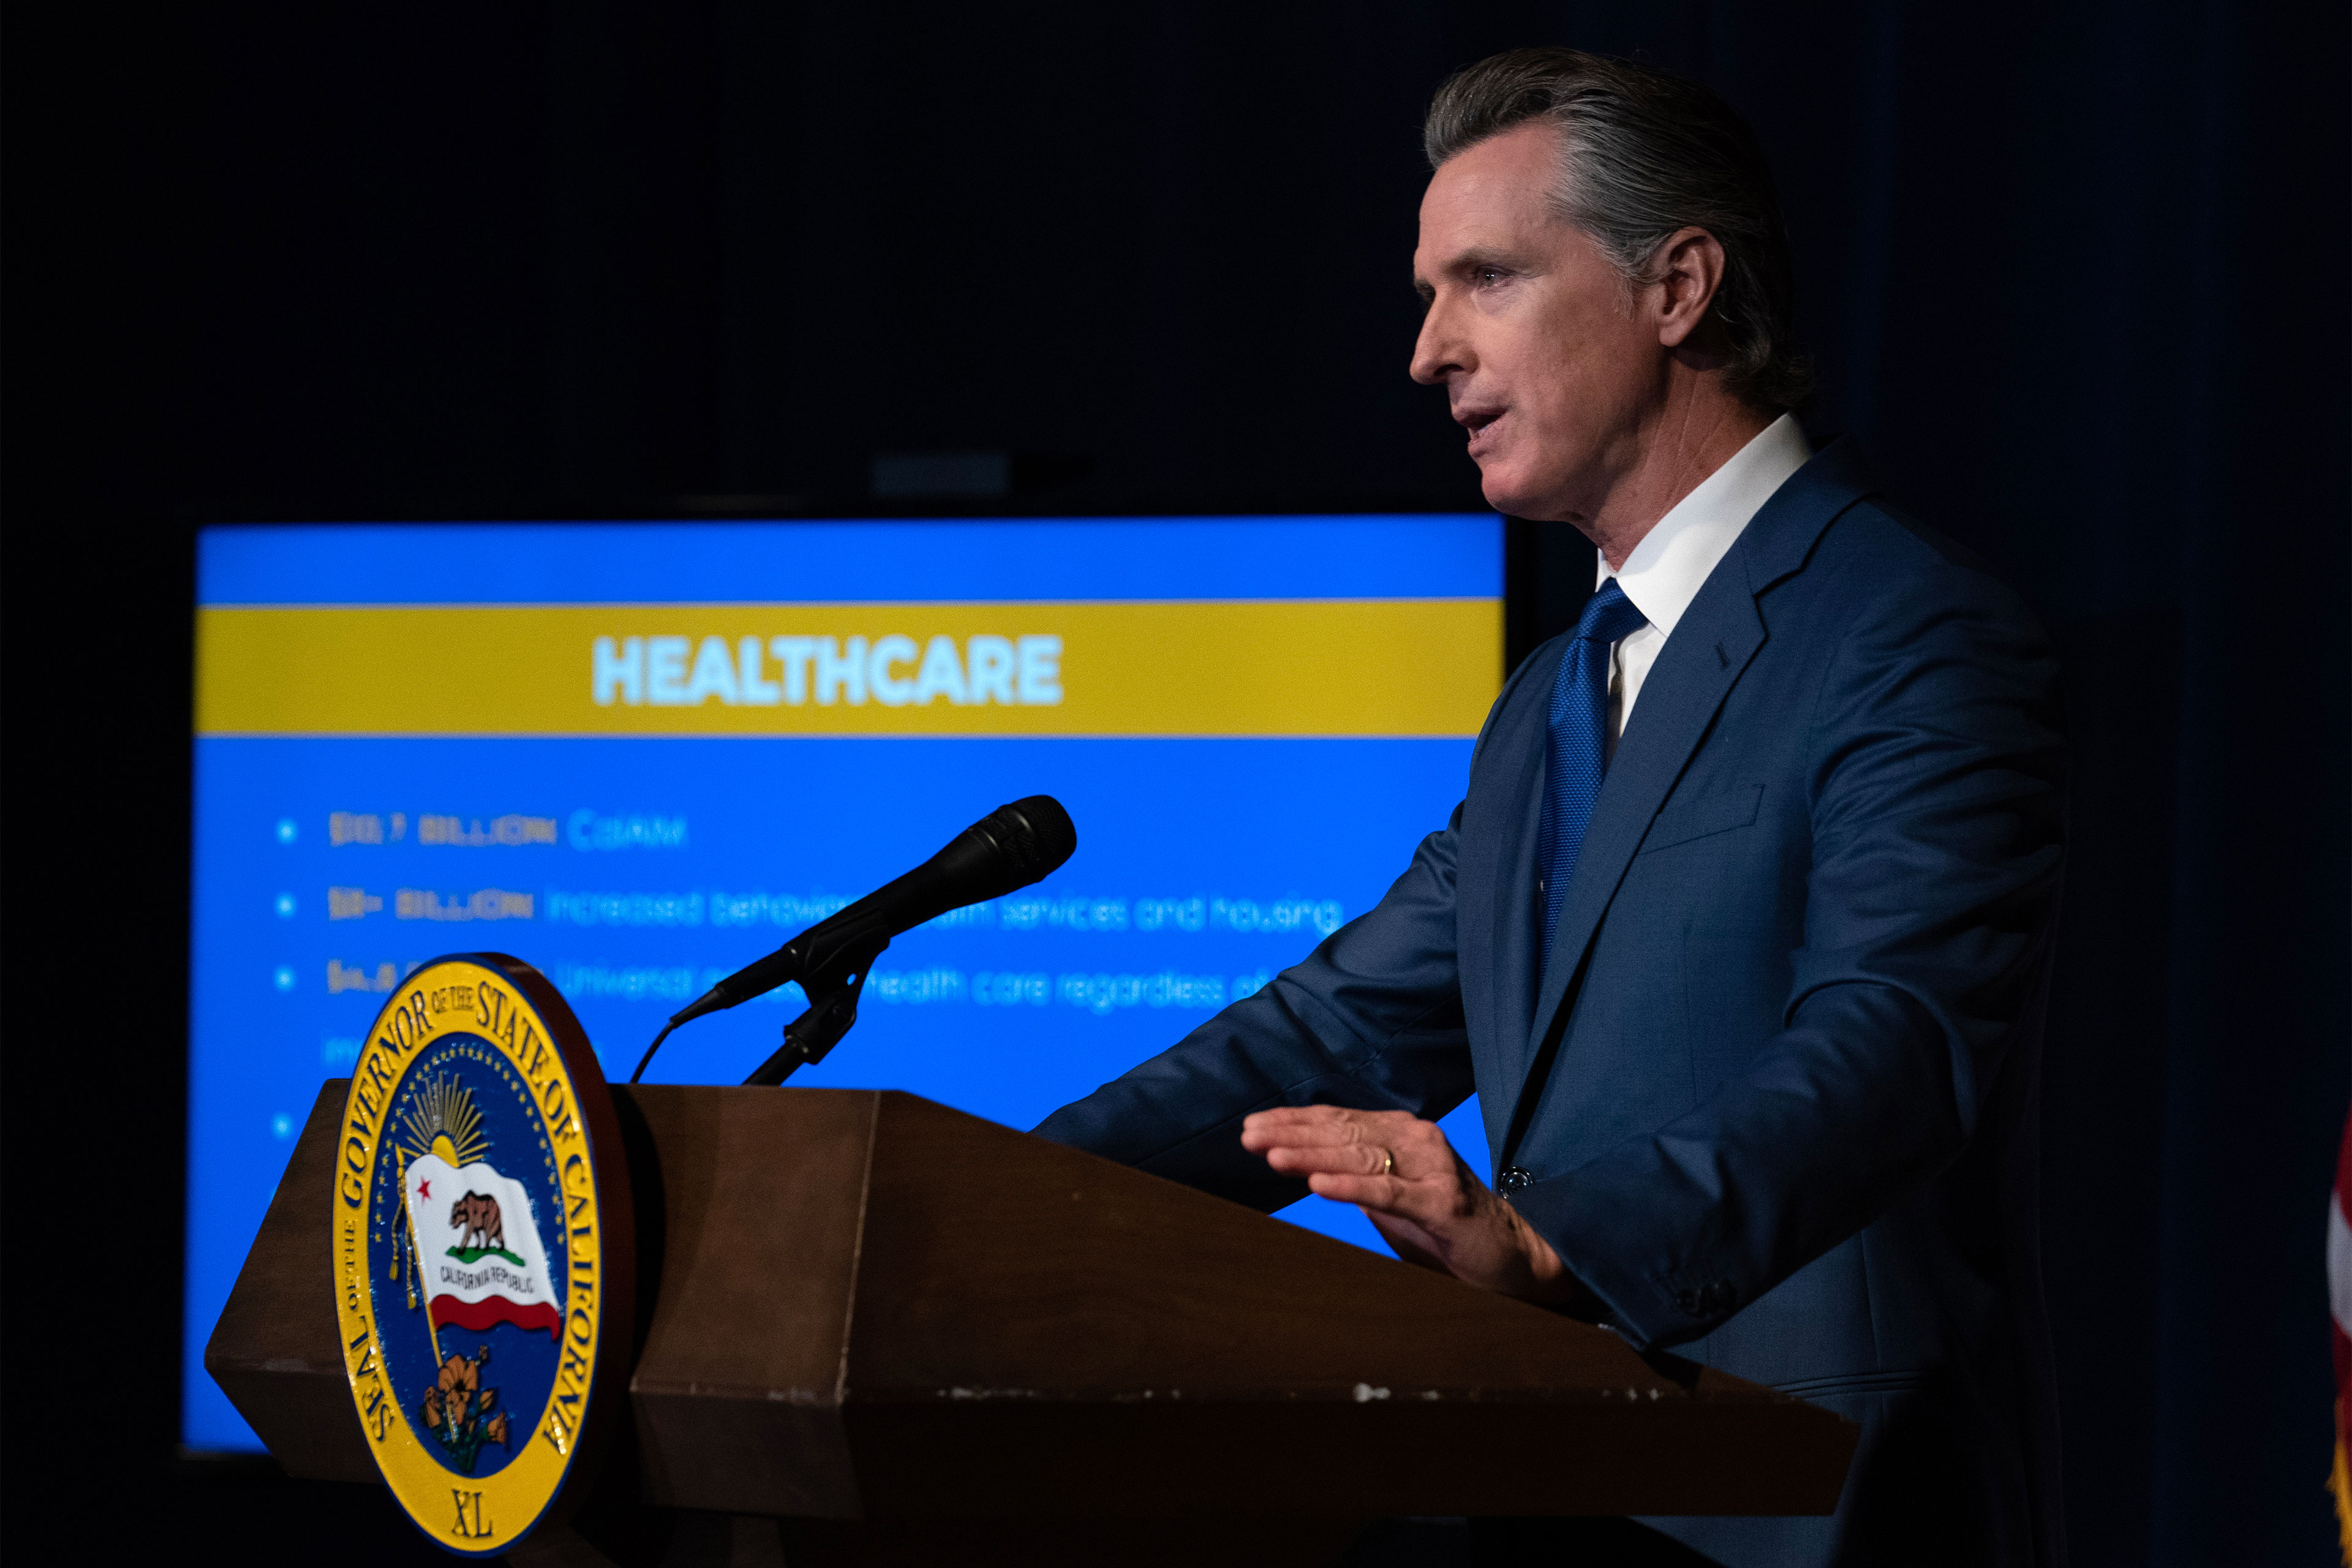 California Governor and Democratic Lawmakers at Odds Over Billions in Health Care Funds